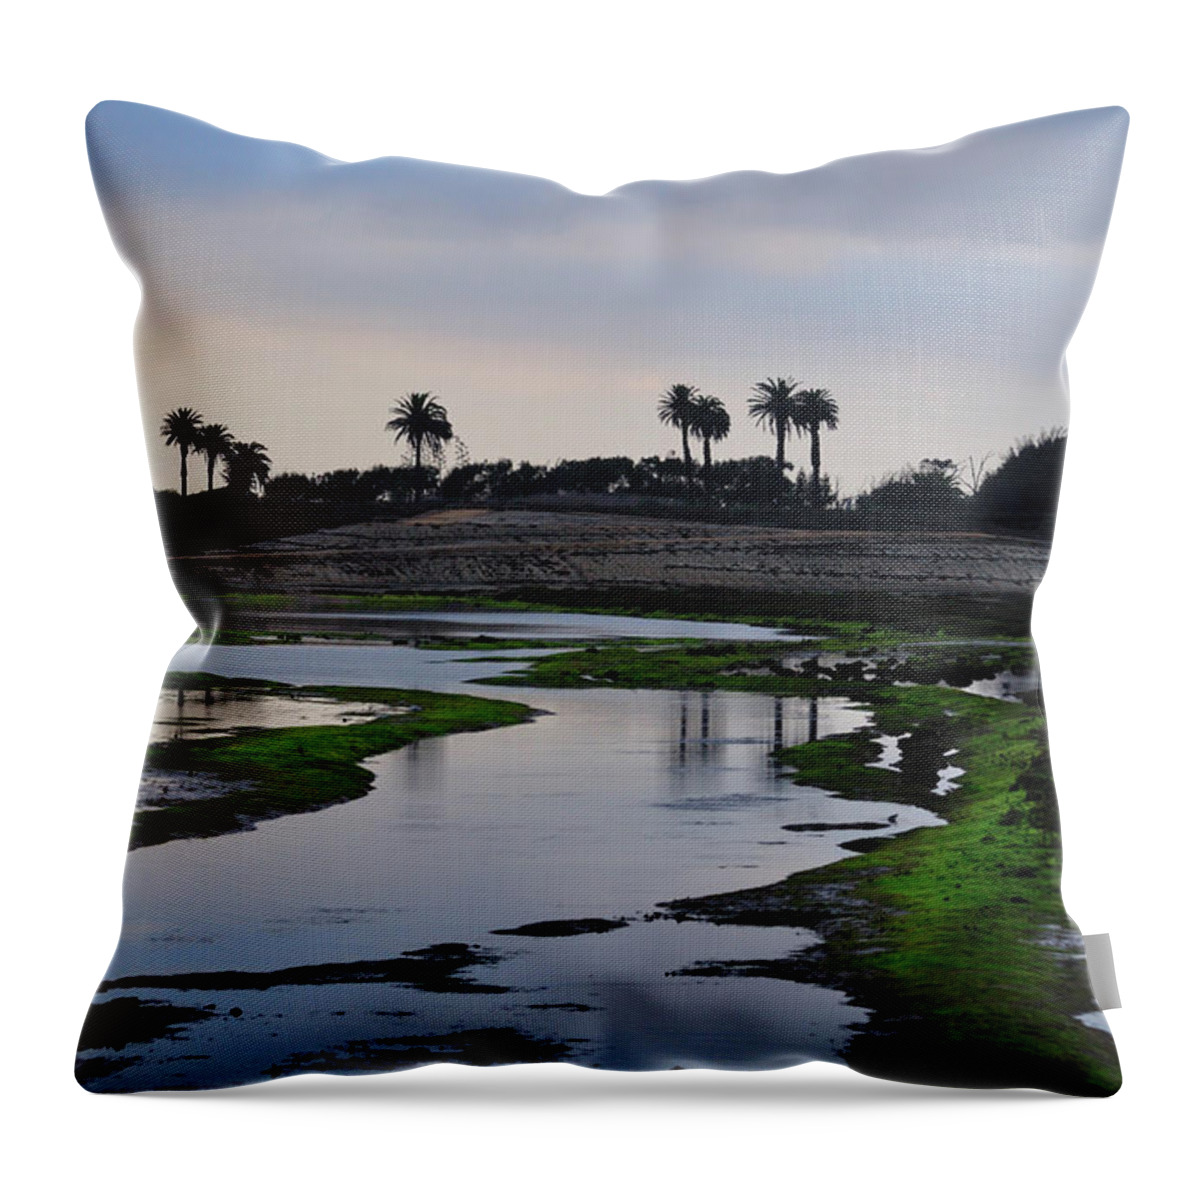 Scenics Throw Pillow featuring the photograph Dusk At The Wetlands by Sandy L. Kirkner